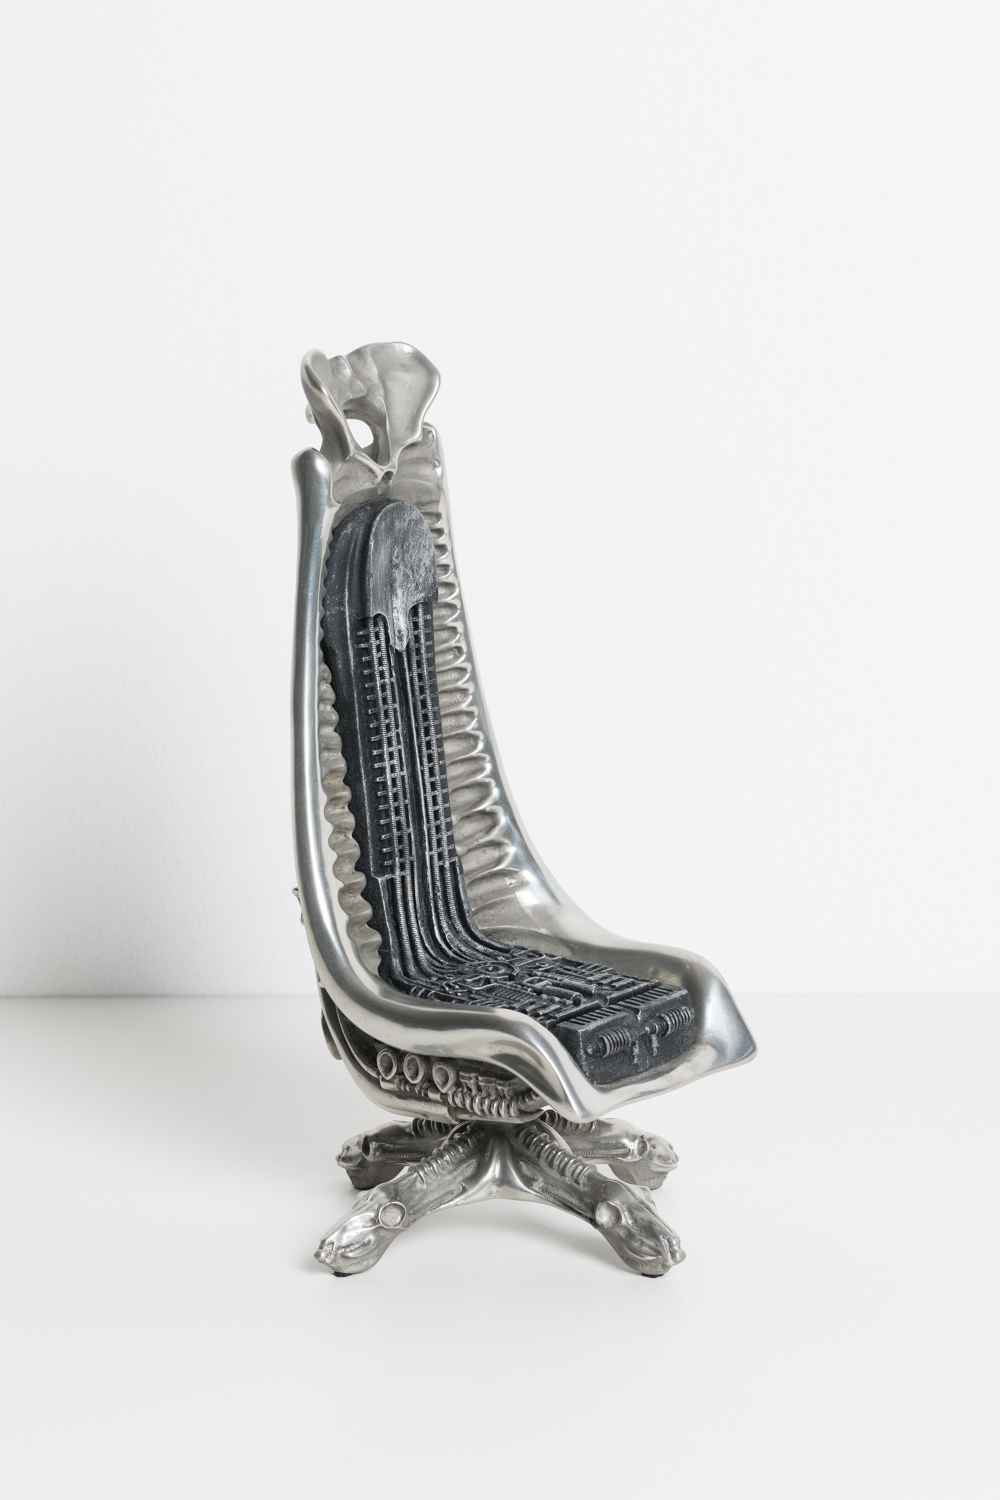 Artwork by H. R. Giger, Harkonnen Chair, Made of Aluminum (cast iron) and plastic